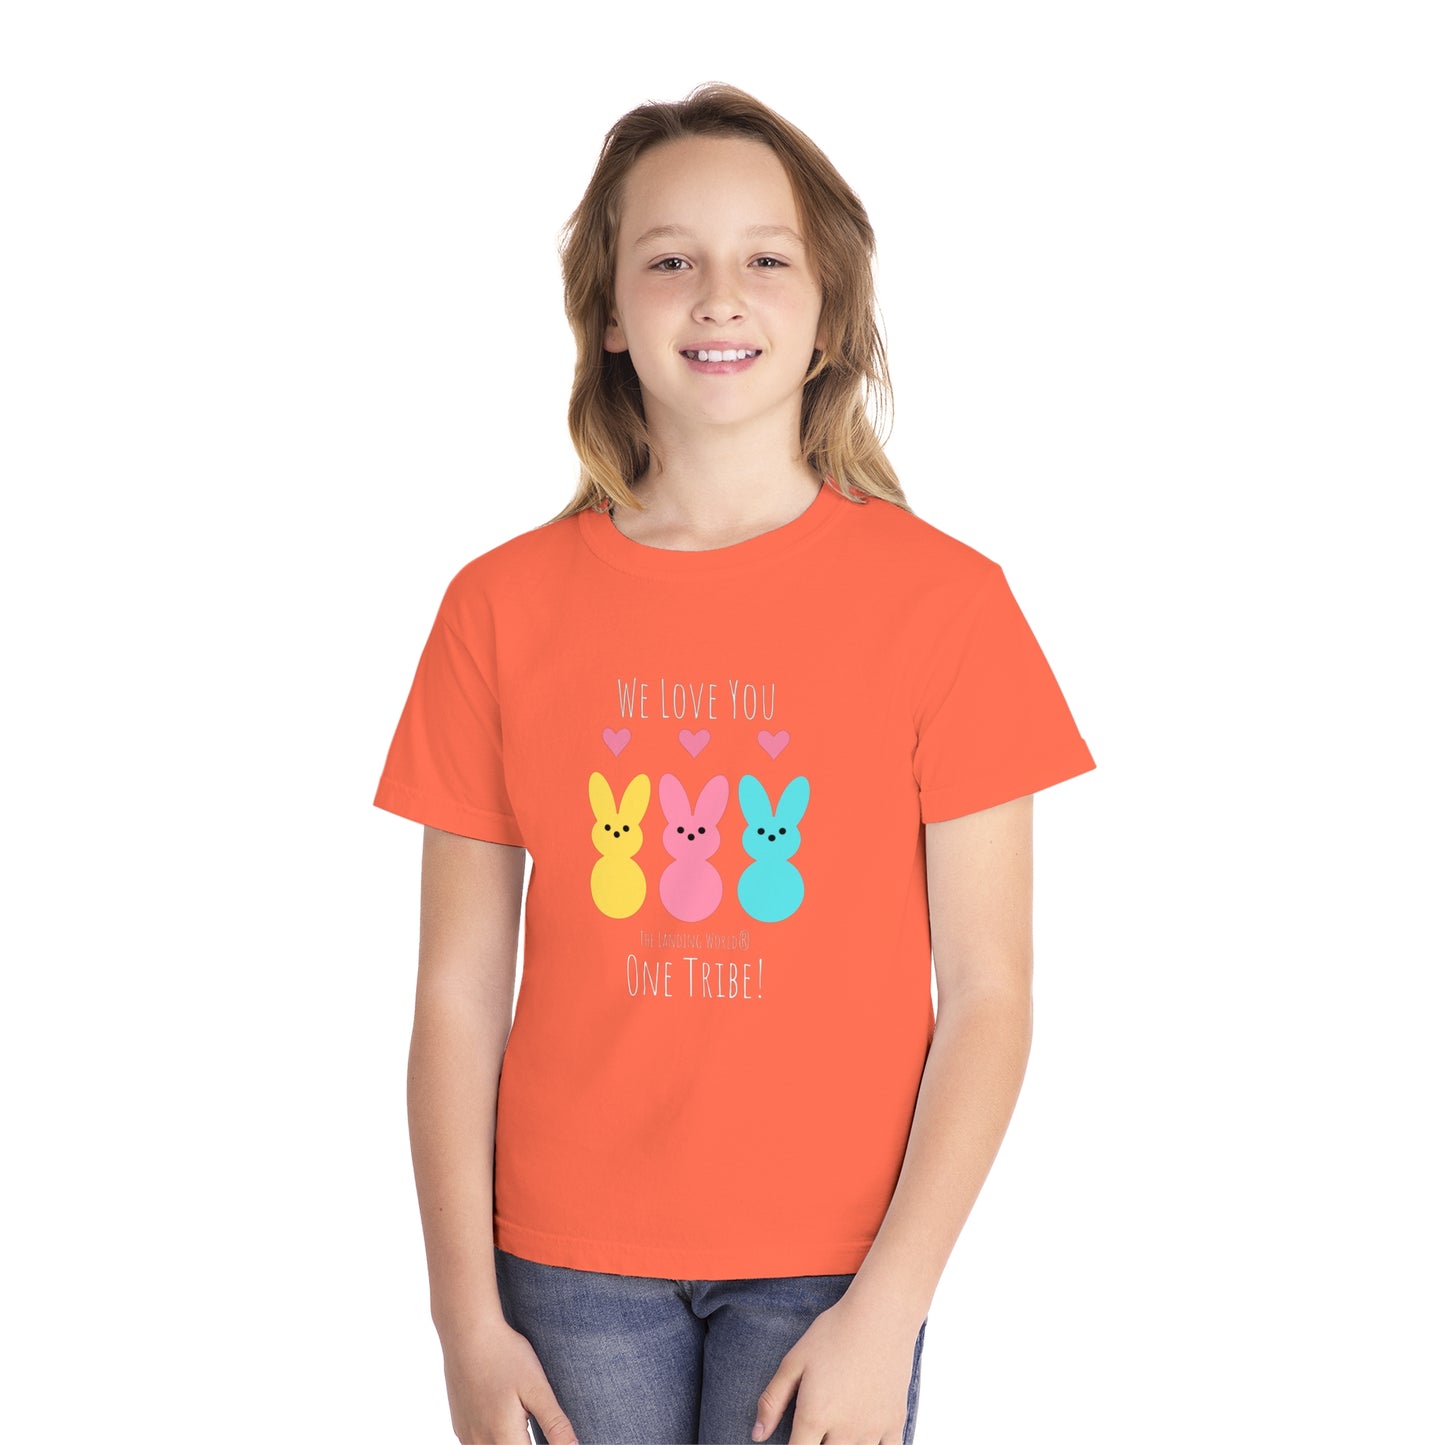 We Love You Kids T'Shirt, One Tribe T'Shirt for Kids